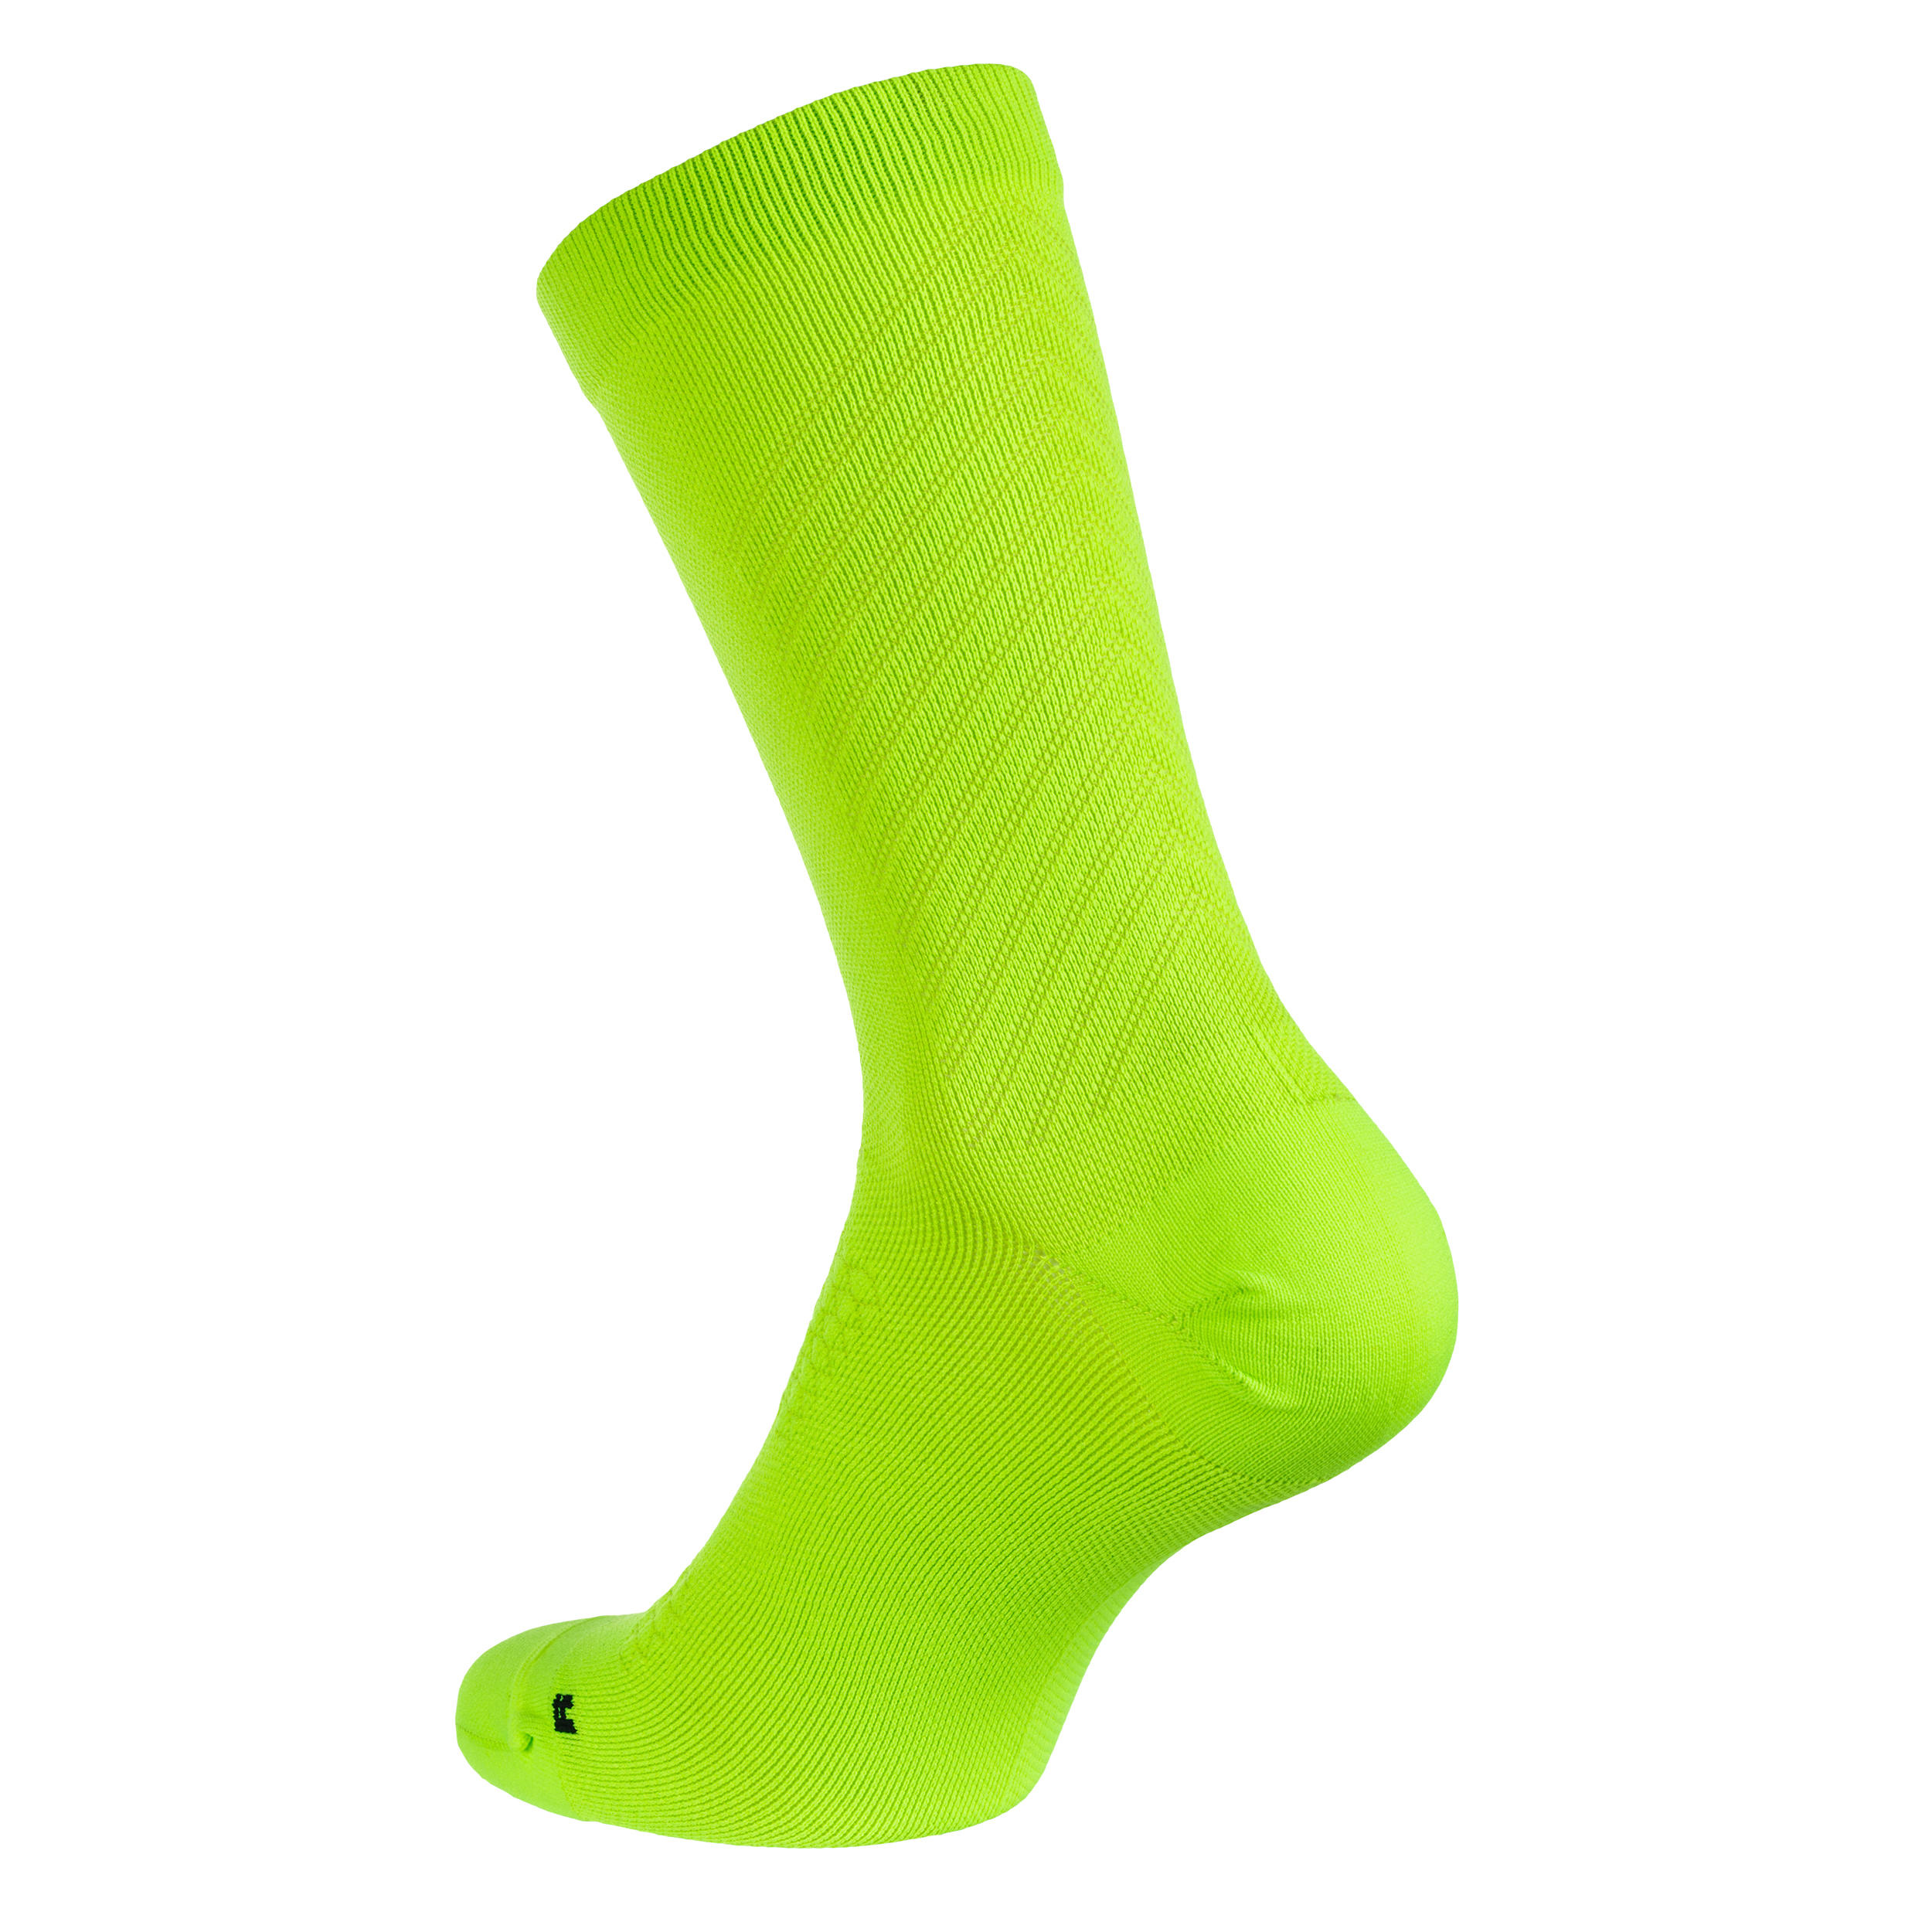 fluo lime yellow / lime green